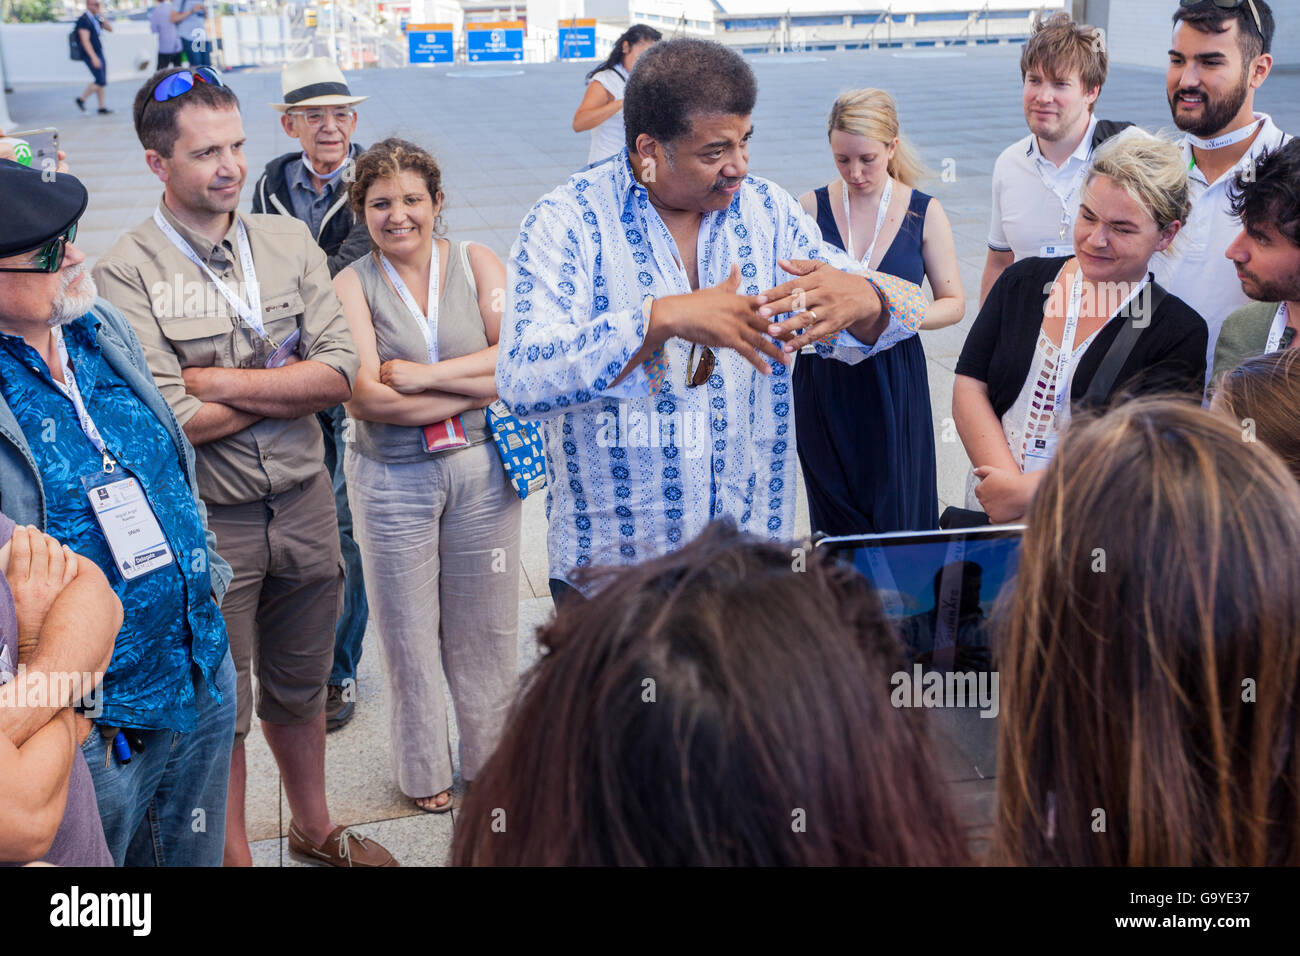 Neil deGrasse Tyson talking with fans at the Starmus festival in Tenerife. He is an American astrophysicist, cosmologist, author, and science communicator. Stock Photo